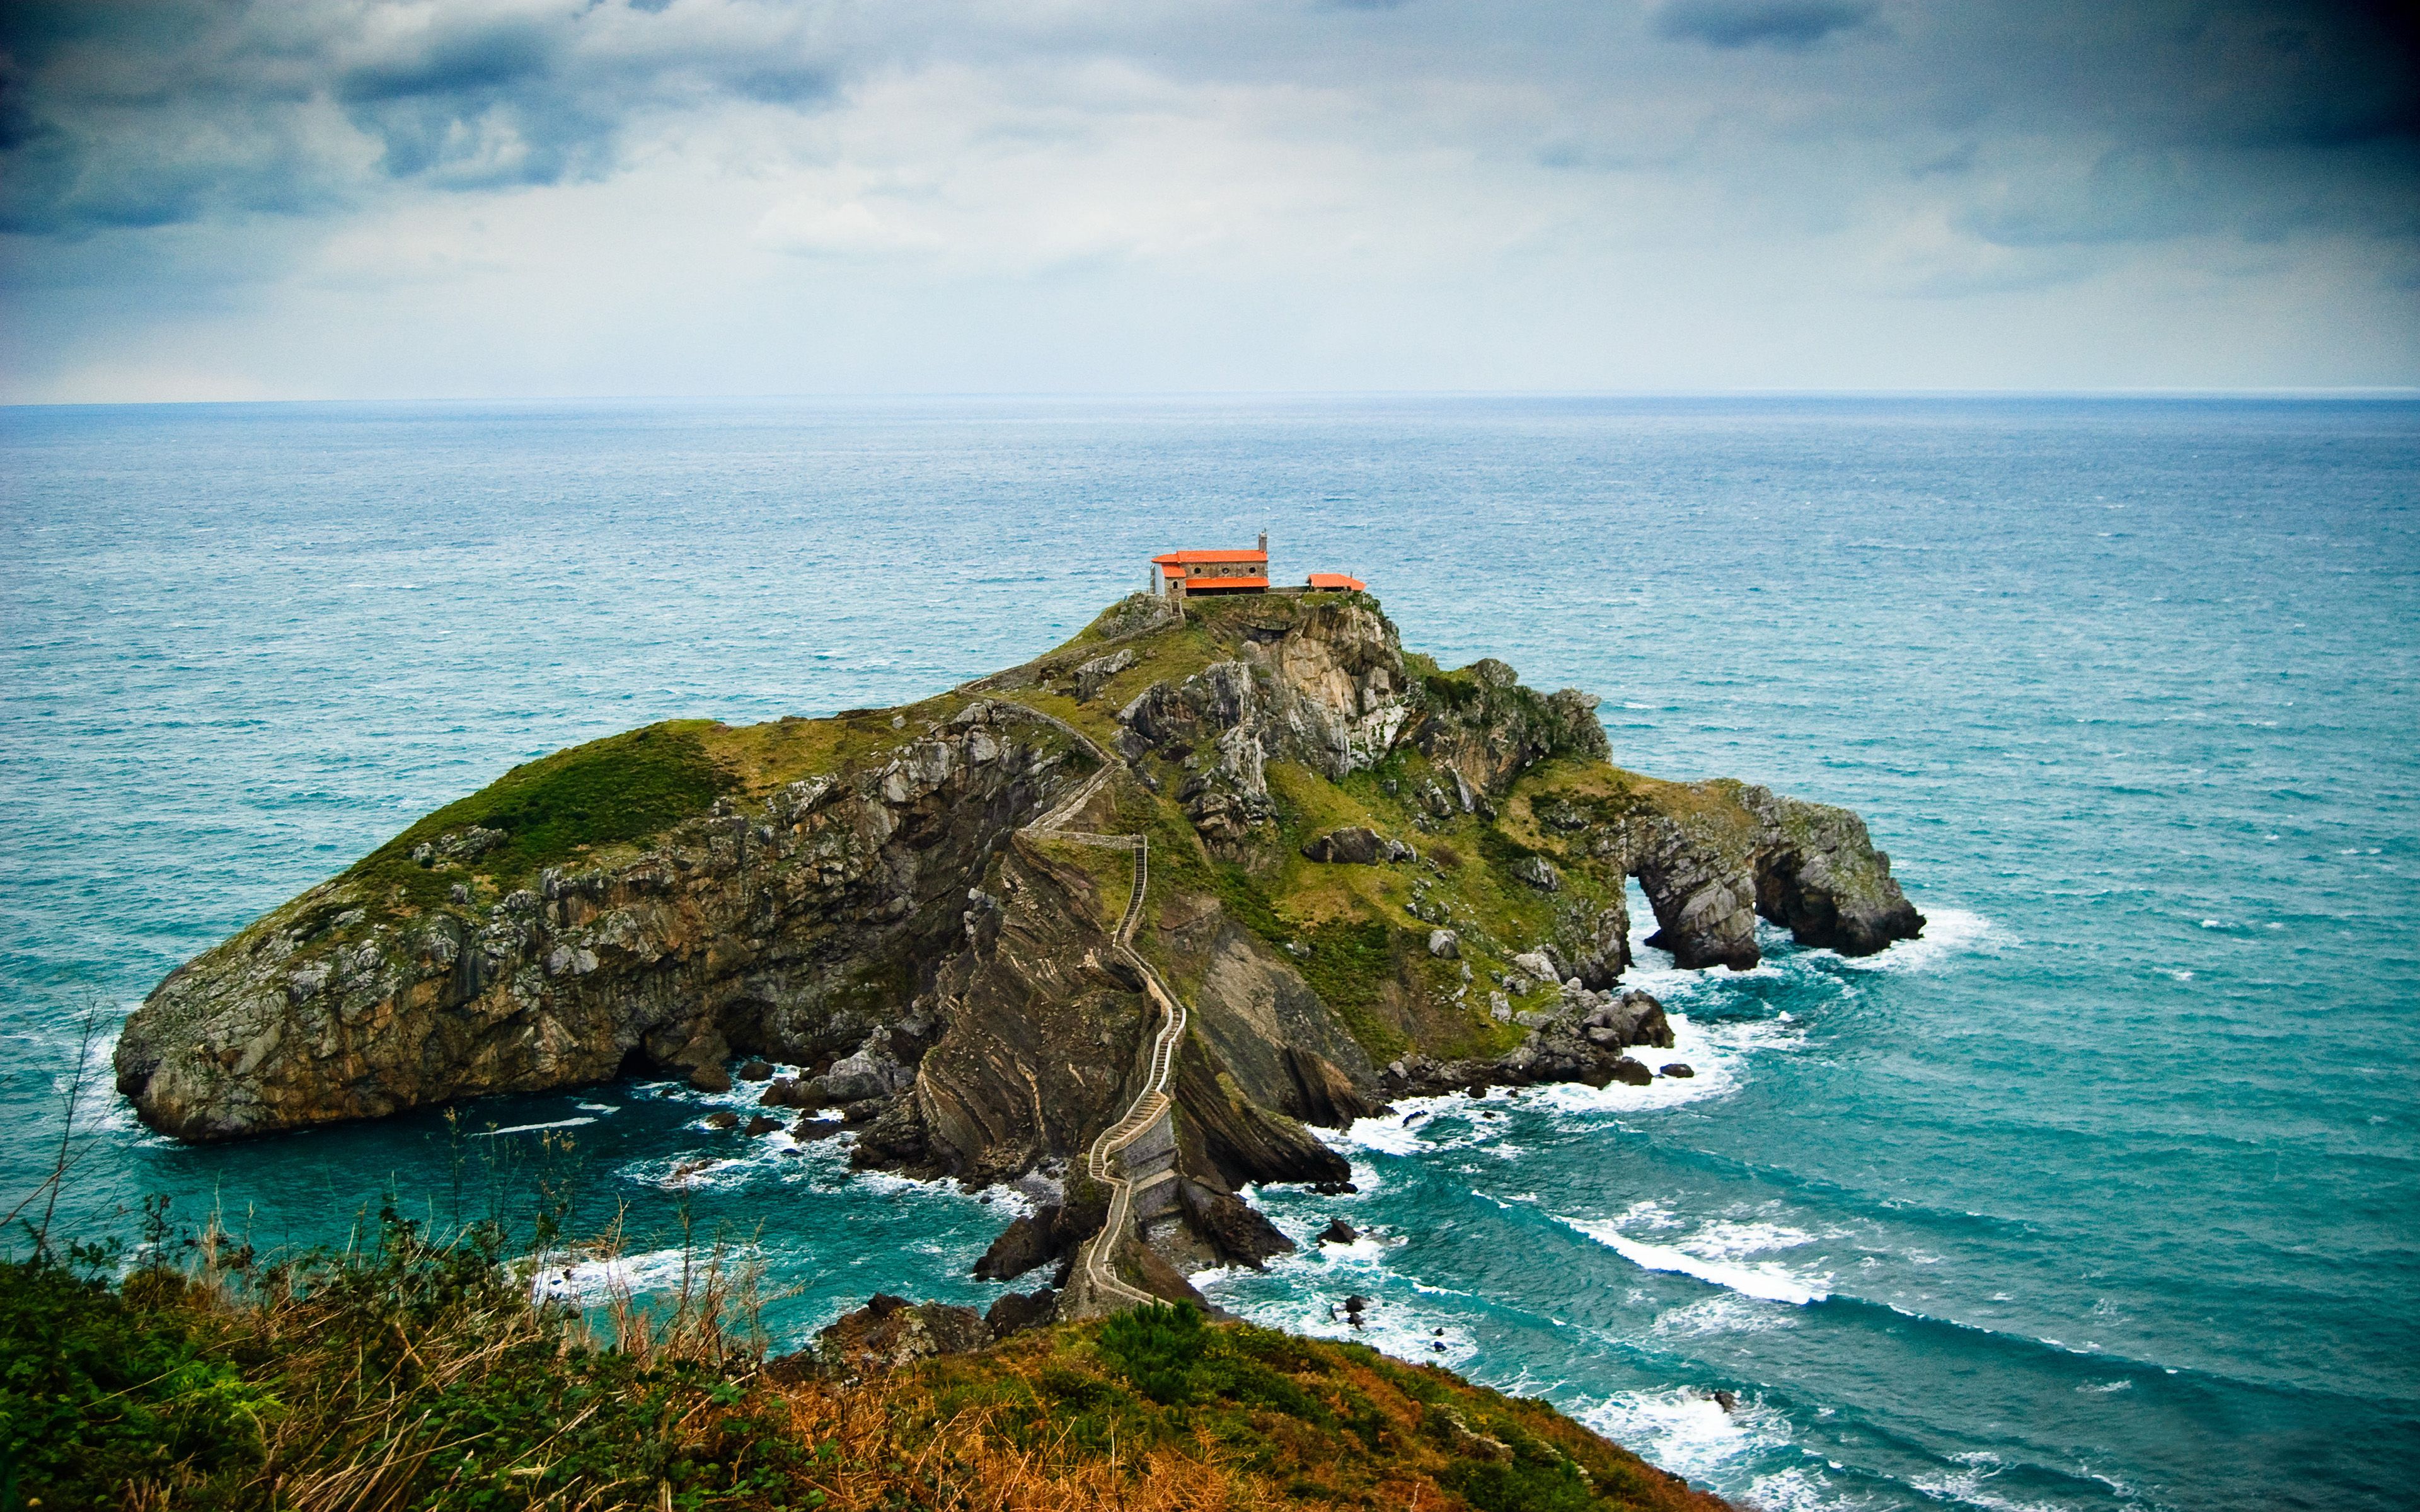 Gaztelugatxe Is An Island Off The Coast Of Biscay Belonging To The Municipality Of Bermeo, Basque Country, Spain, Wallpaper13.com